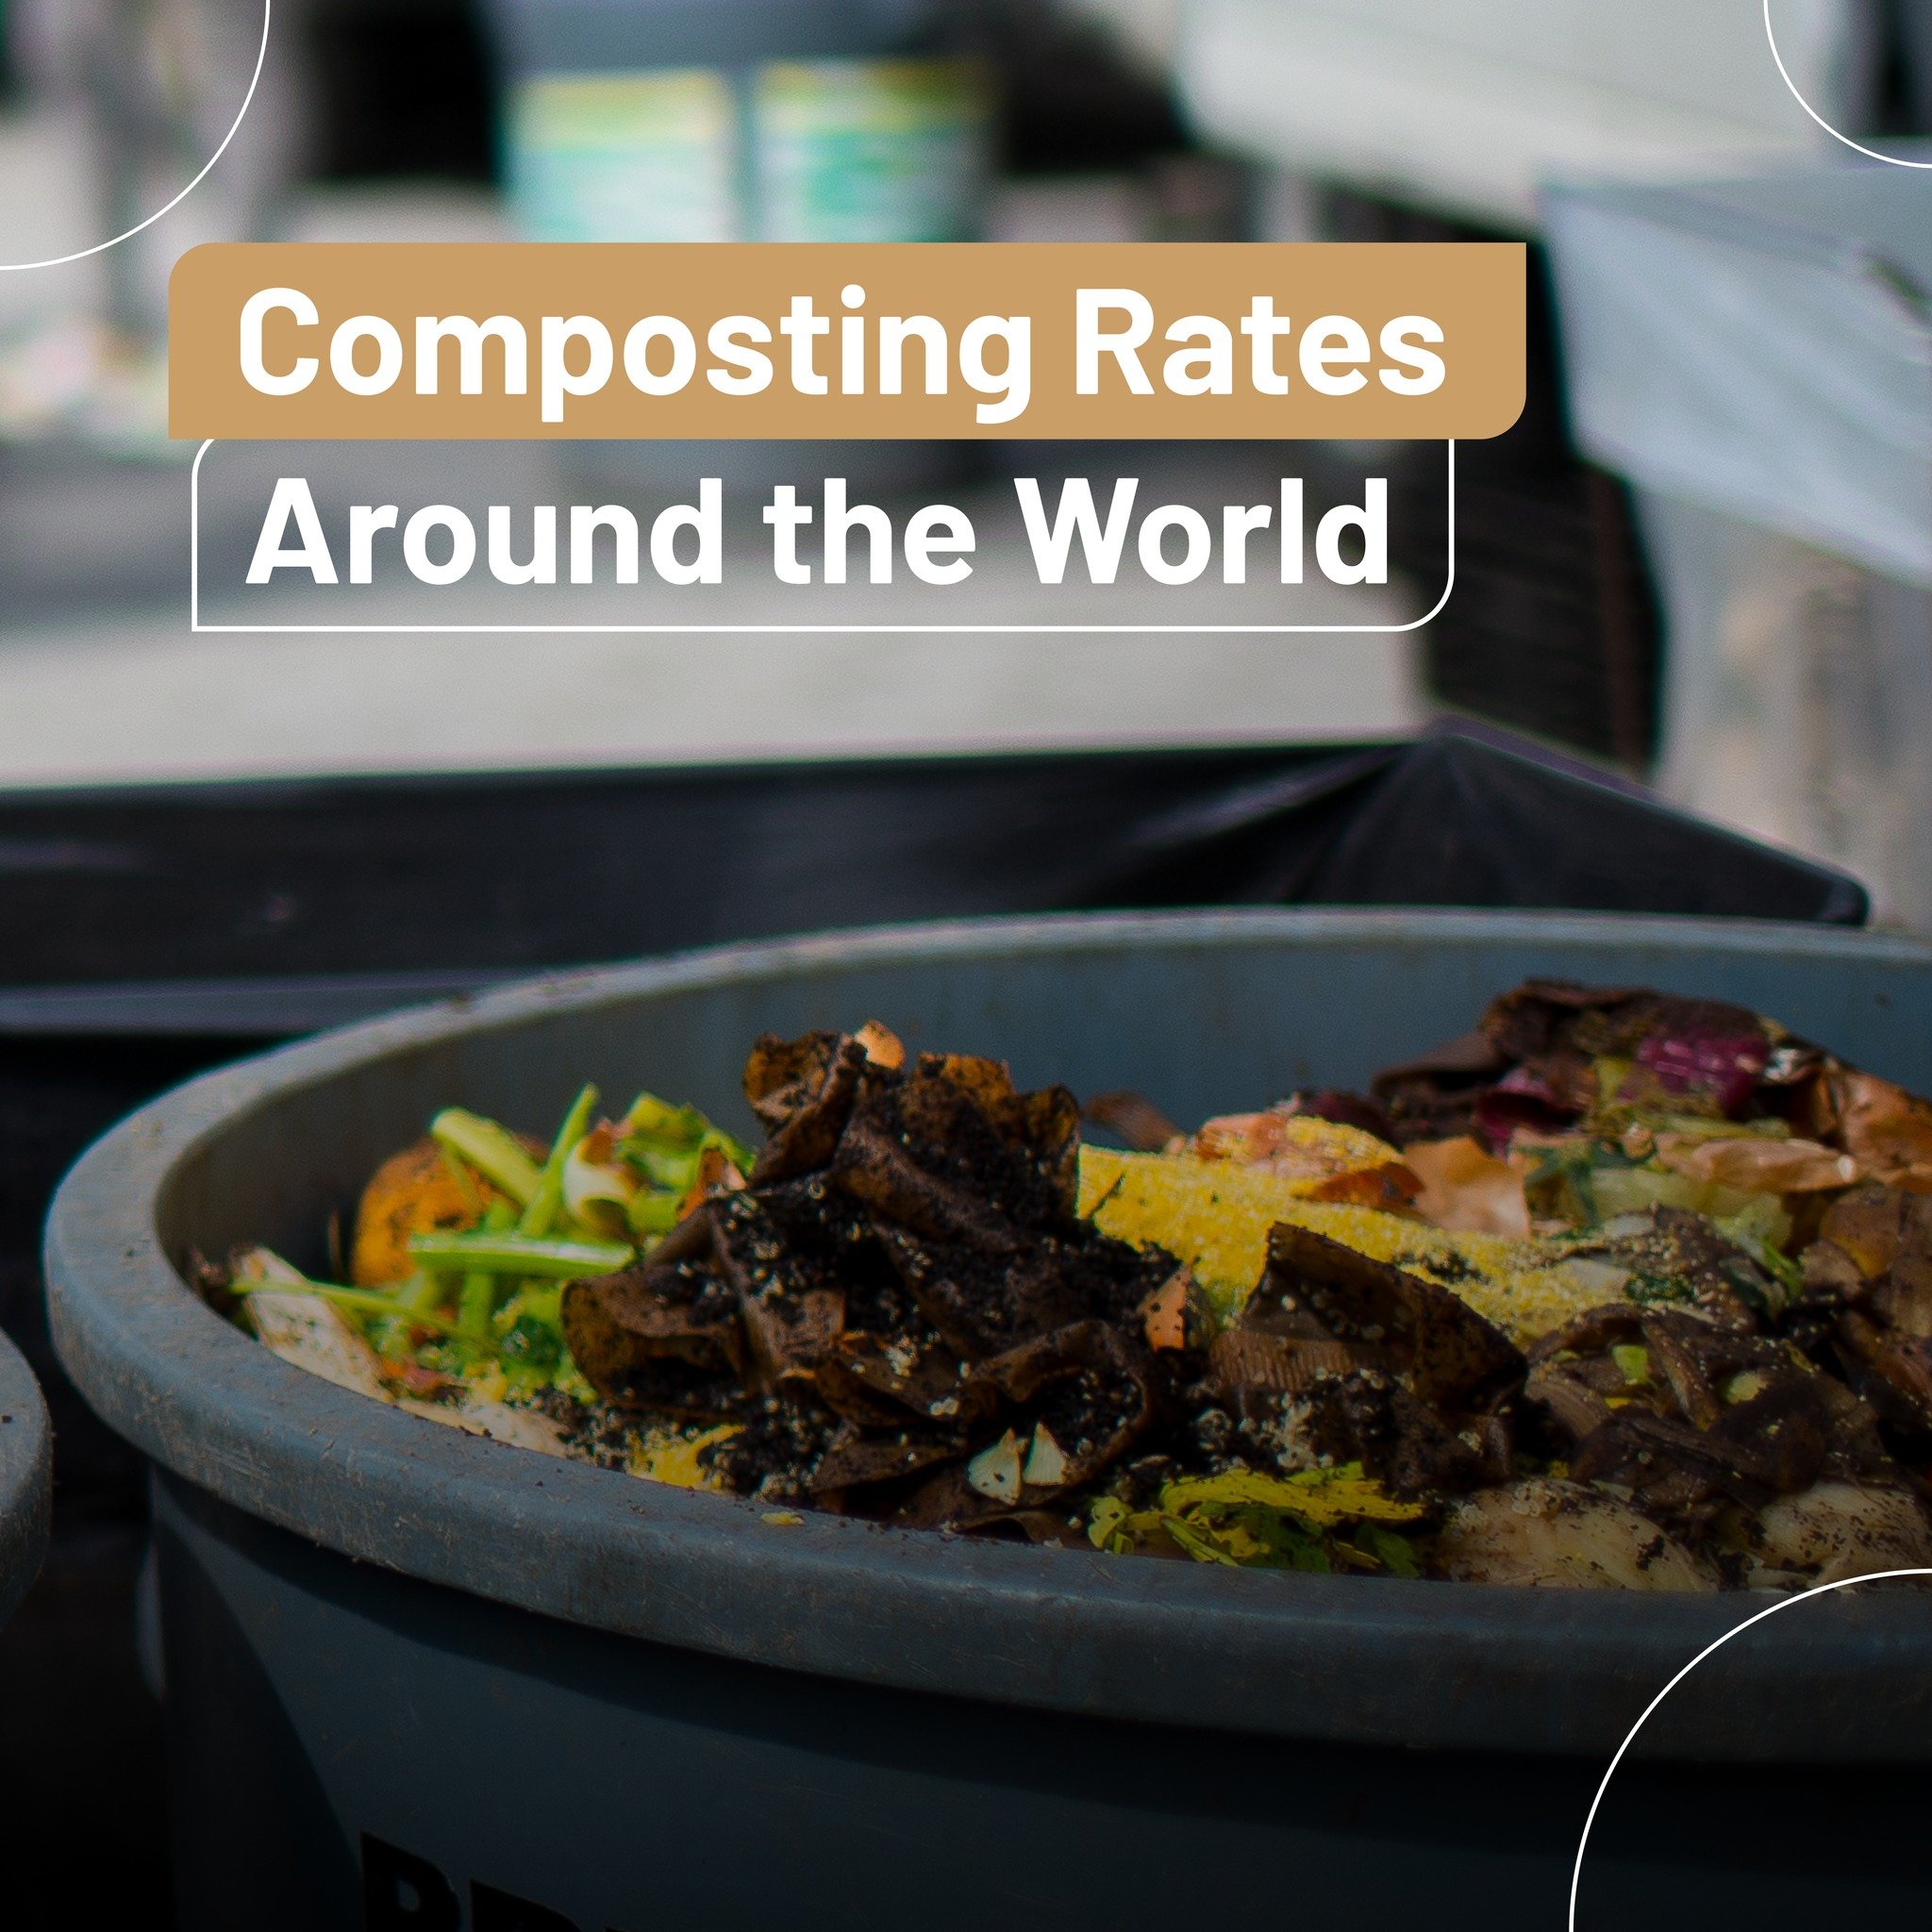 Composting has become a powerful solution in our global efforts to reduce waste and promote sustainability. Across the world, countries are achieving remarkable composting rates, turning organic waste into valuable resources for agriculture and garde